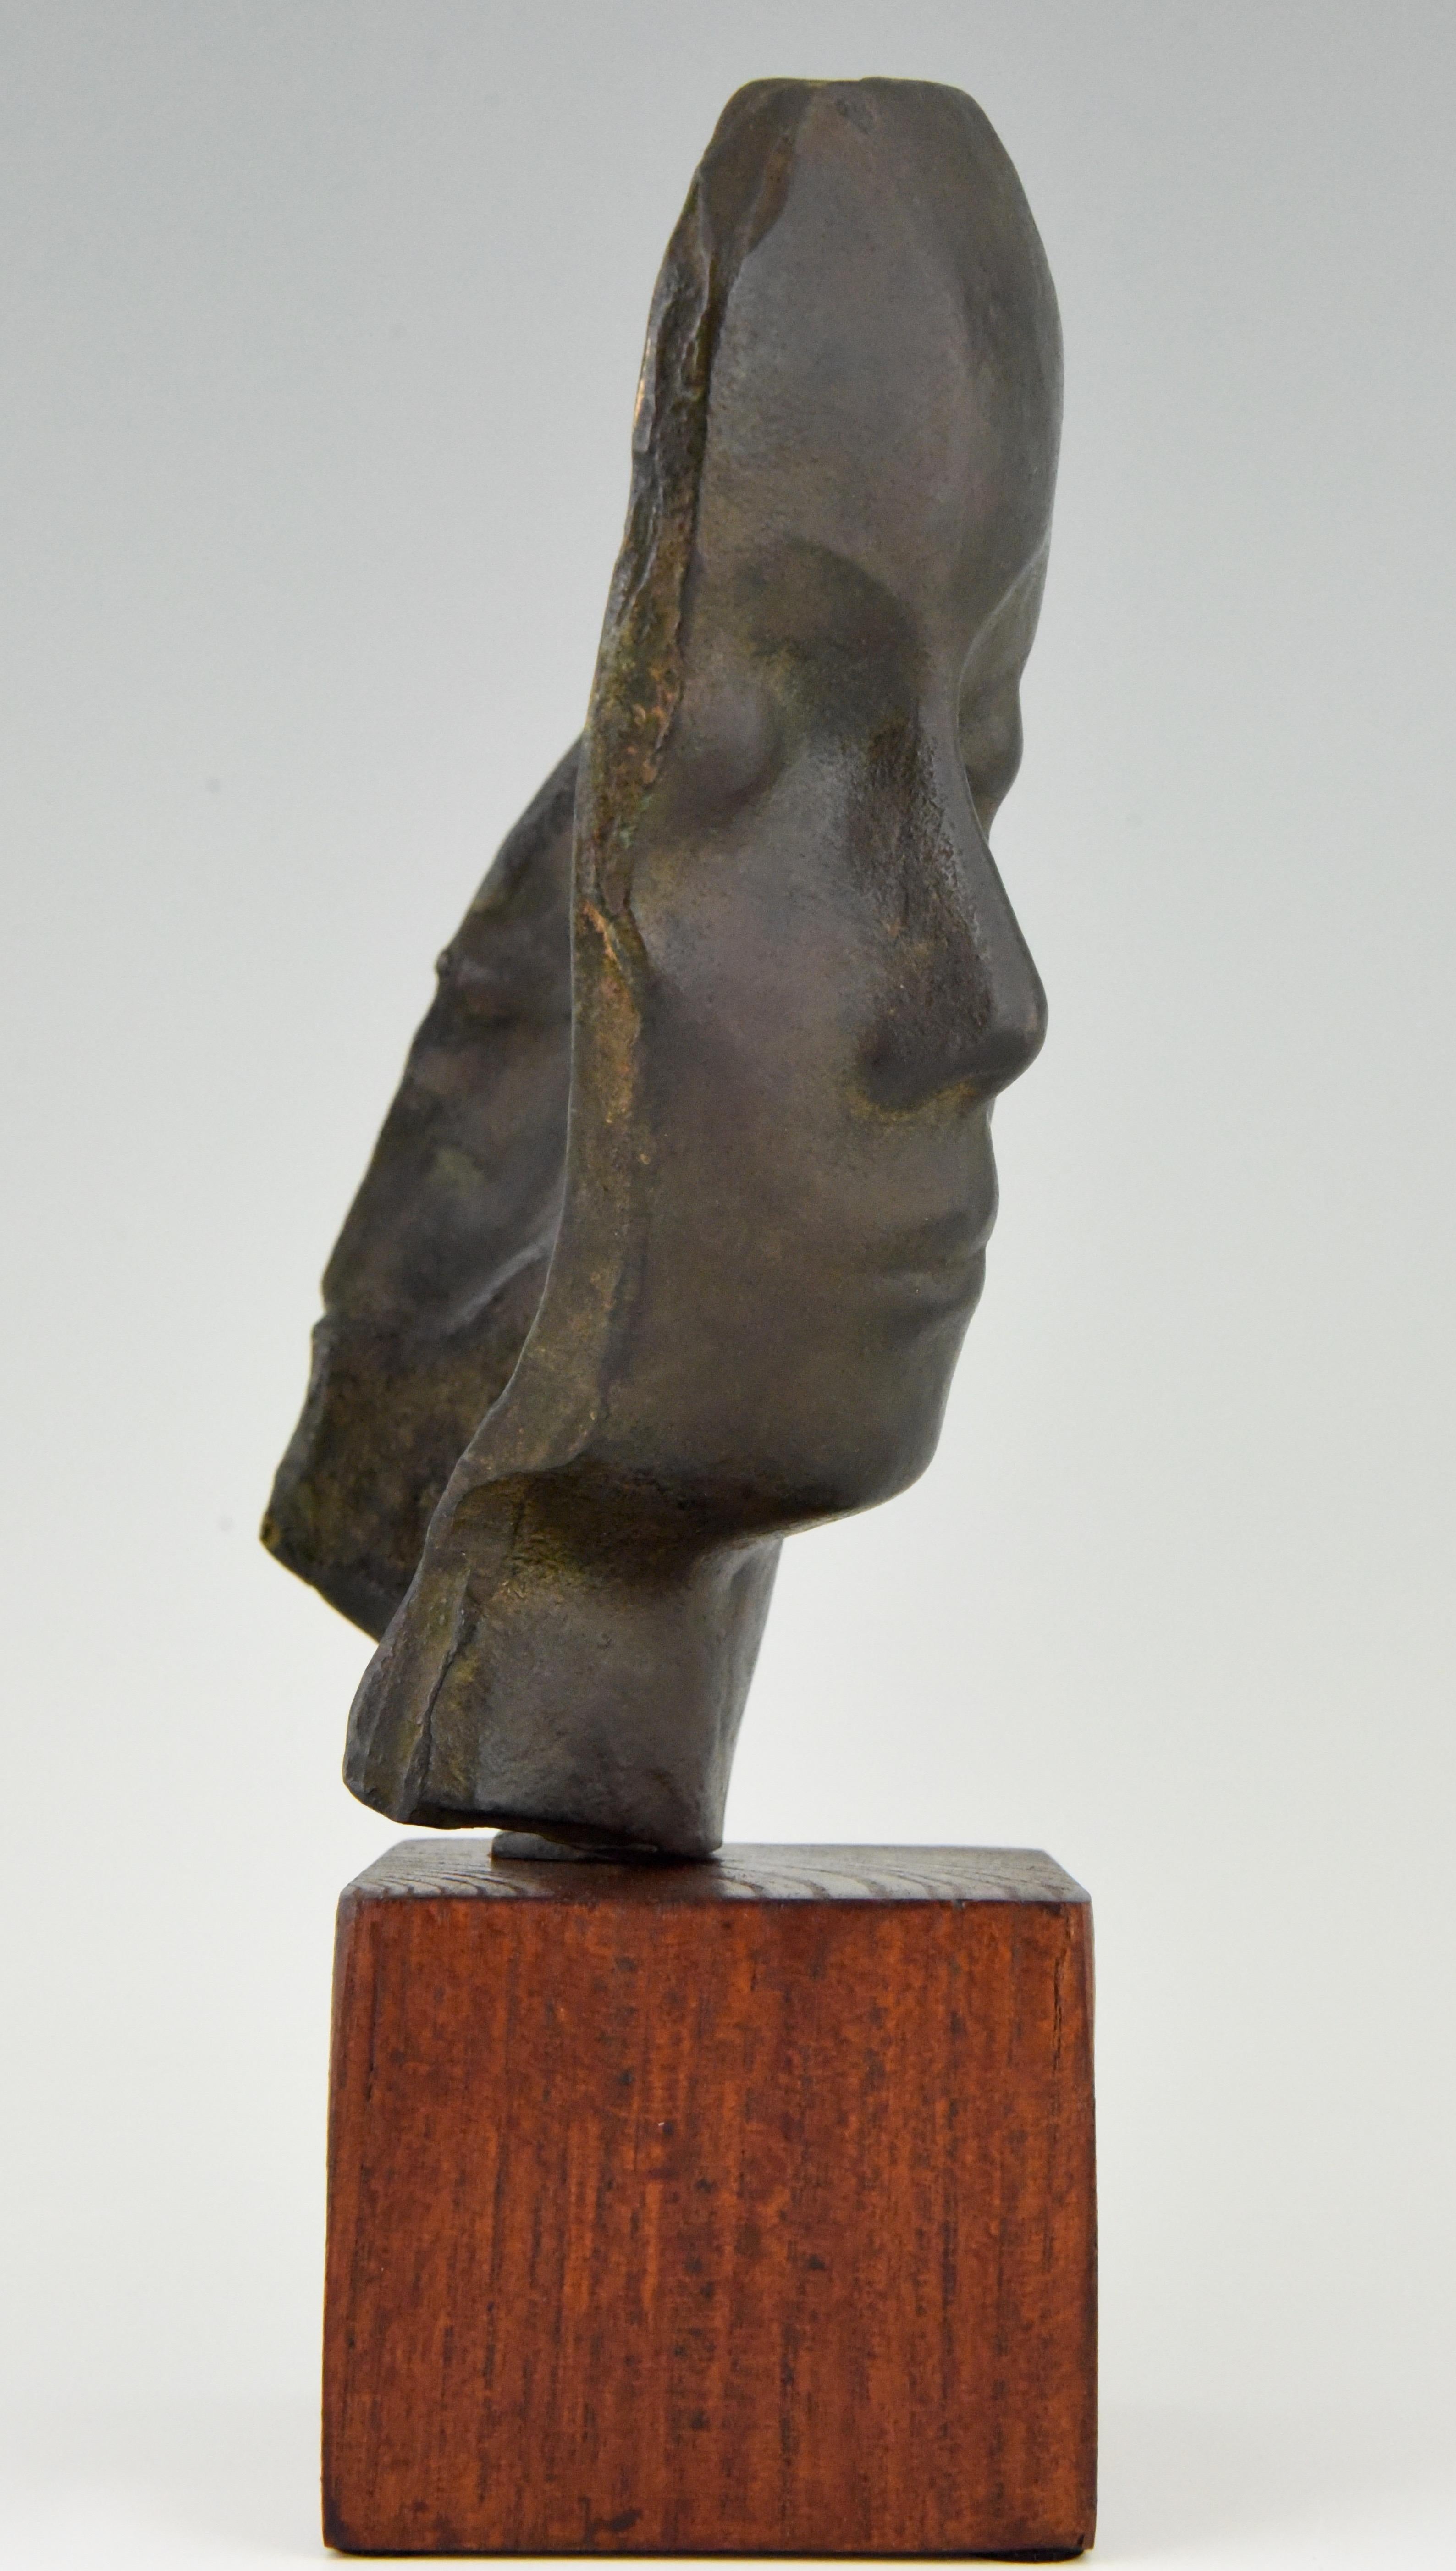 French Art Deco Bronze Sculpture of a Woman's Face Francisque Lapandery, 1925